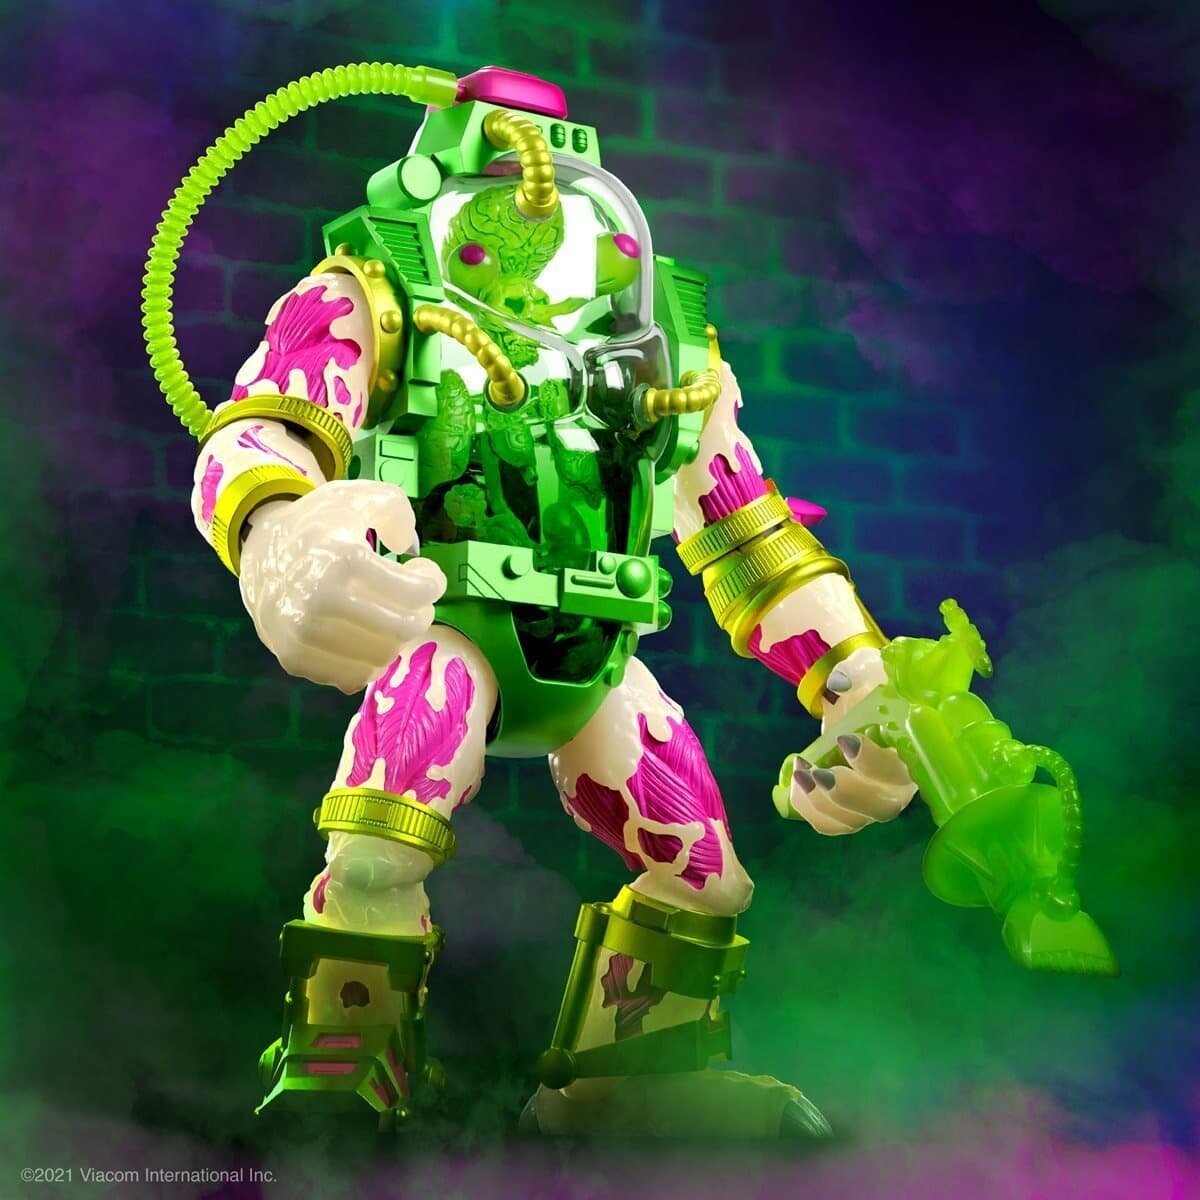 TMNT Ultimates: MUTAGEN MAN (glow in the dark) EE Exclusive in stores this week! Still waiting on the Fed Ex truck, these should arrive very soon, PM for holds and pricing!

#mutagenman #eeexclusive #tmnt #tmntultimates #ashevillecomics #youractionfi